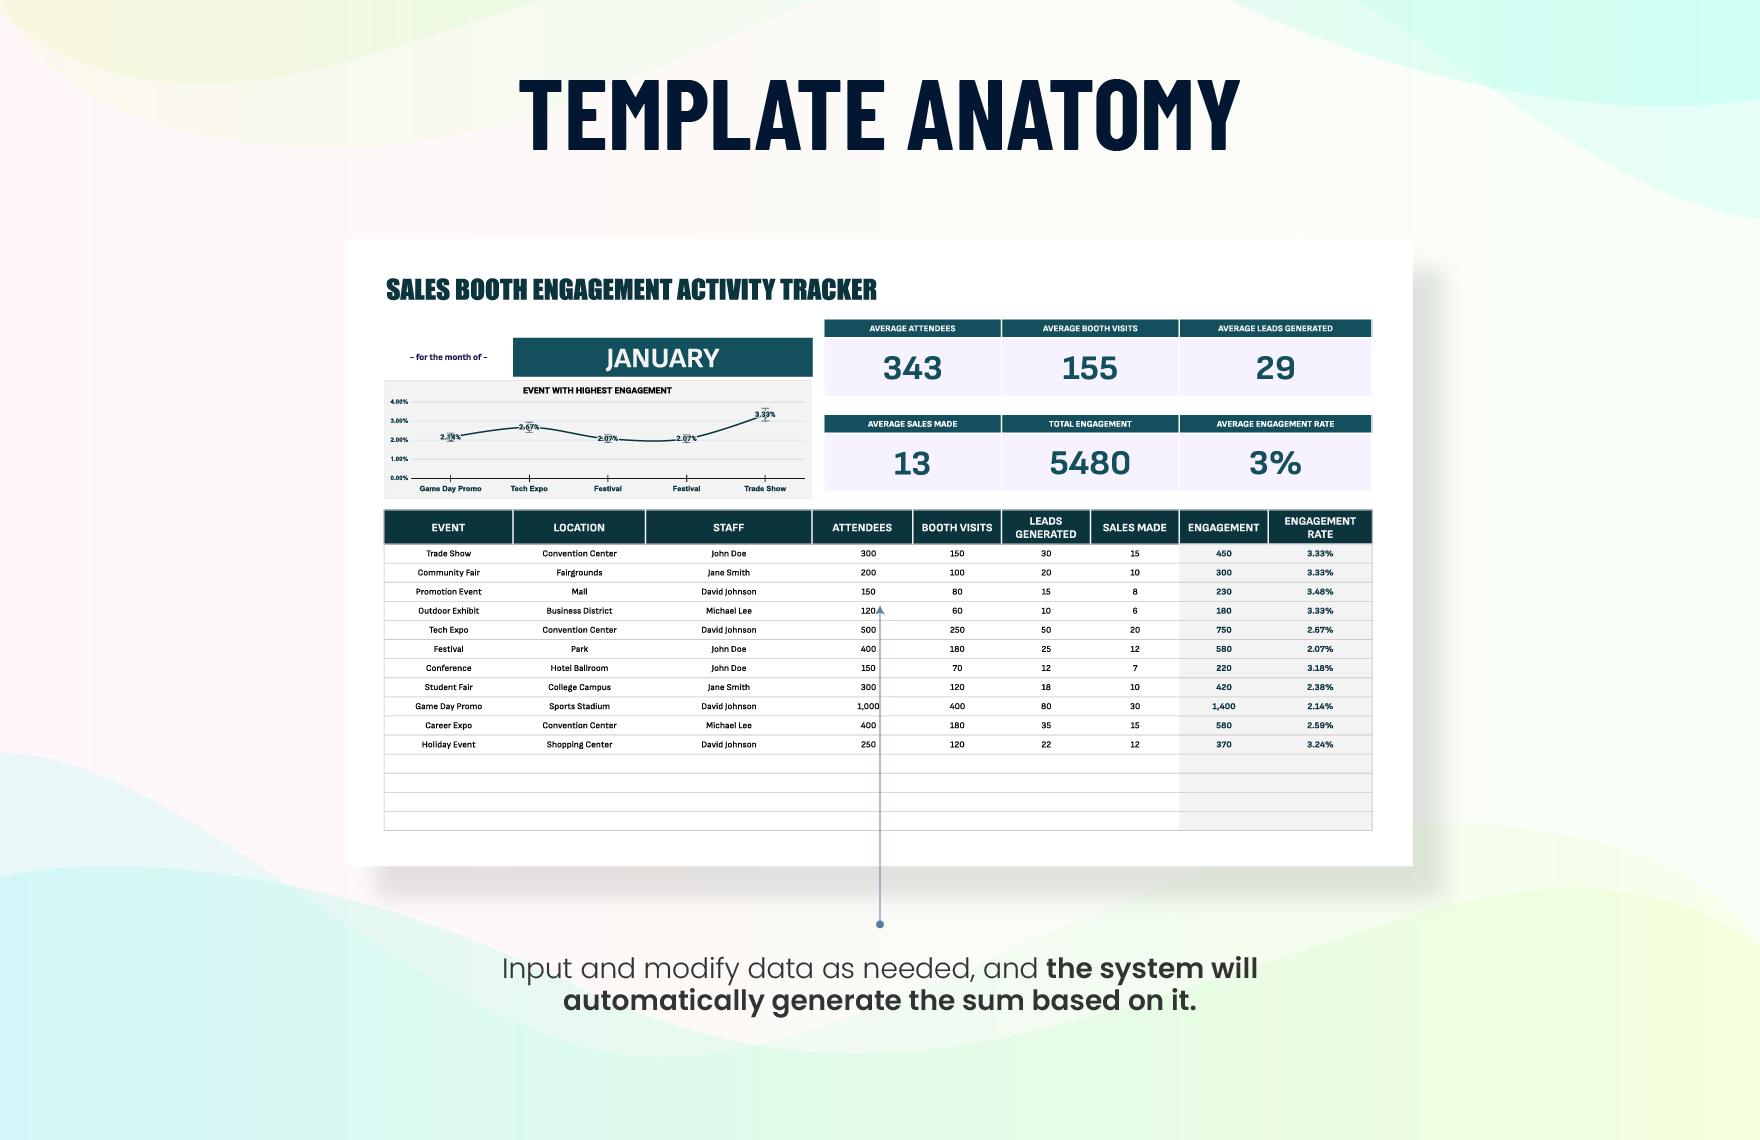 Sales Booth Engagement Activity Tracker Template